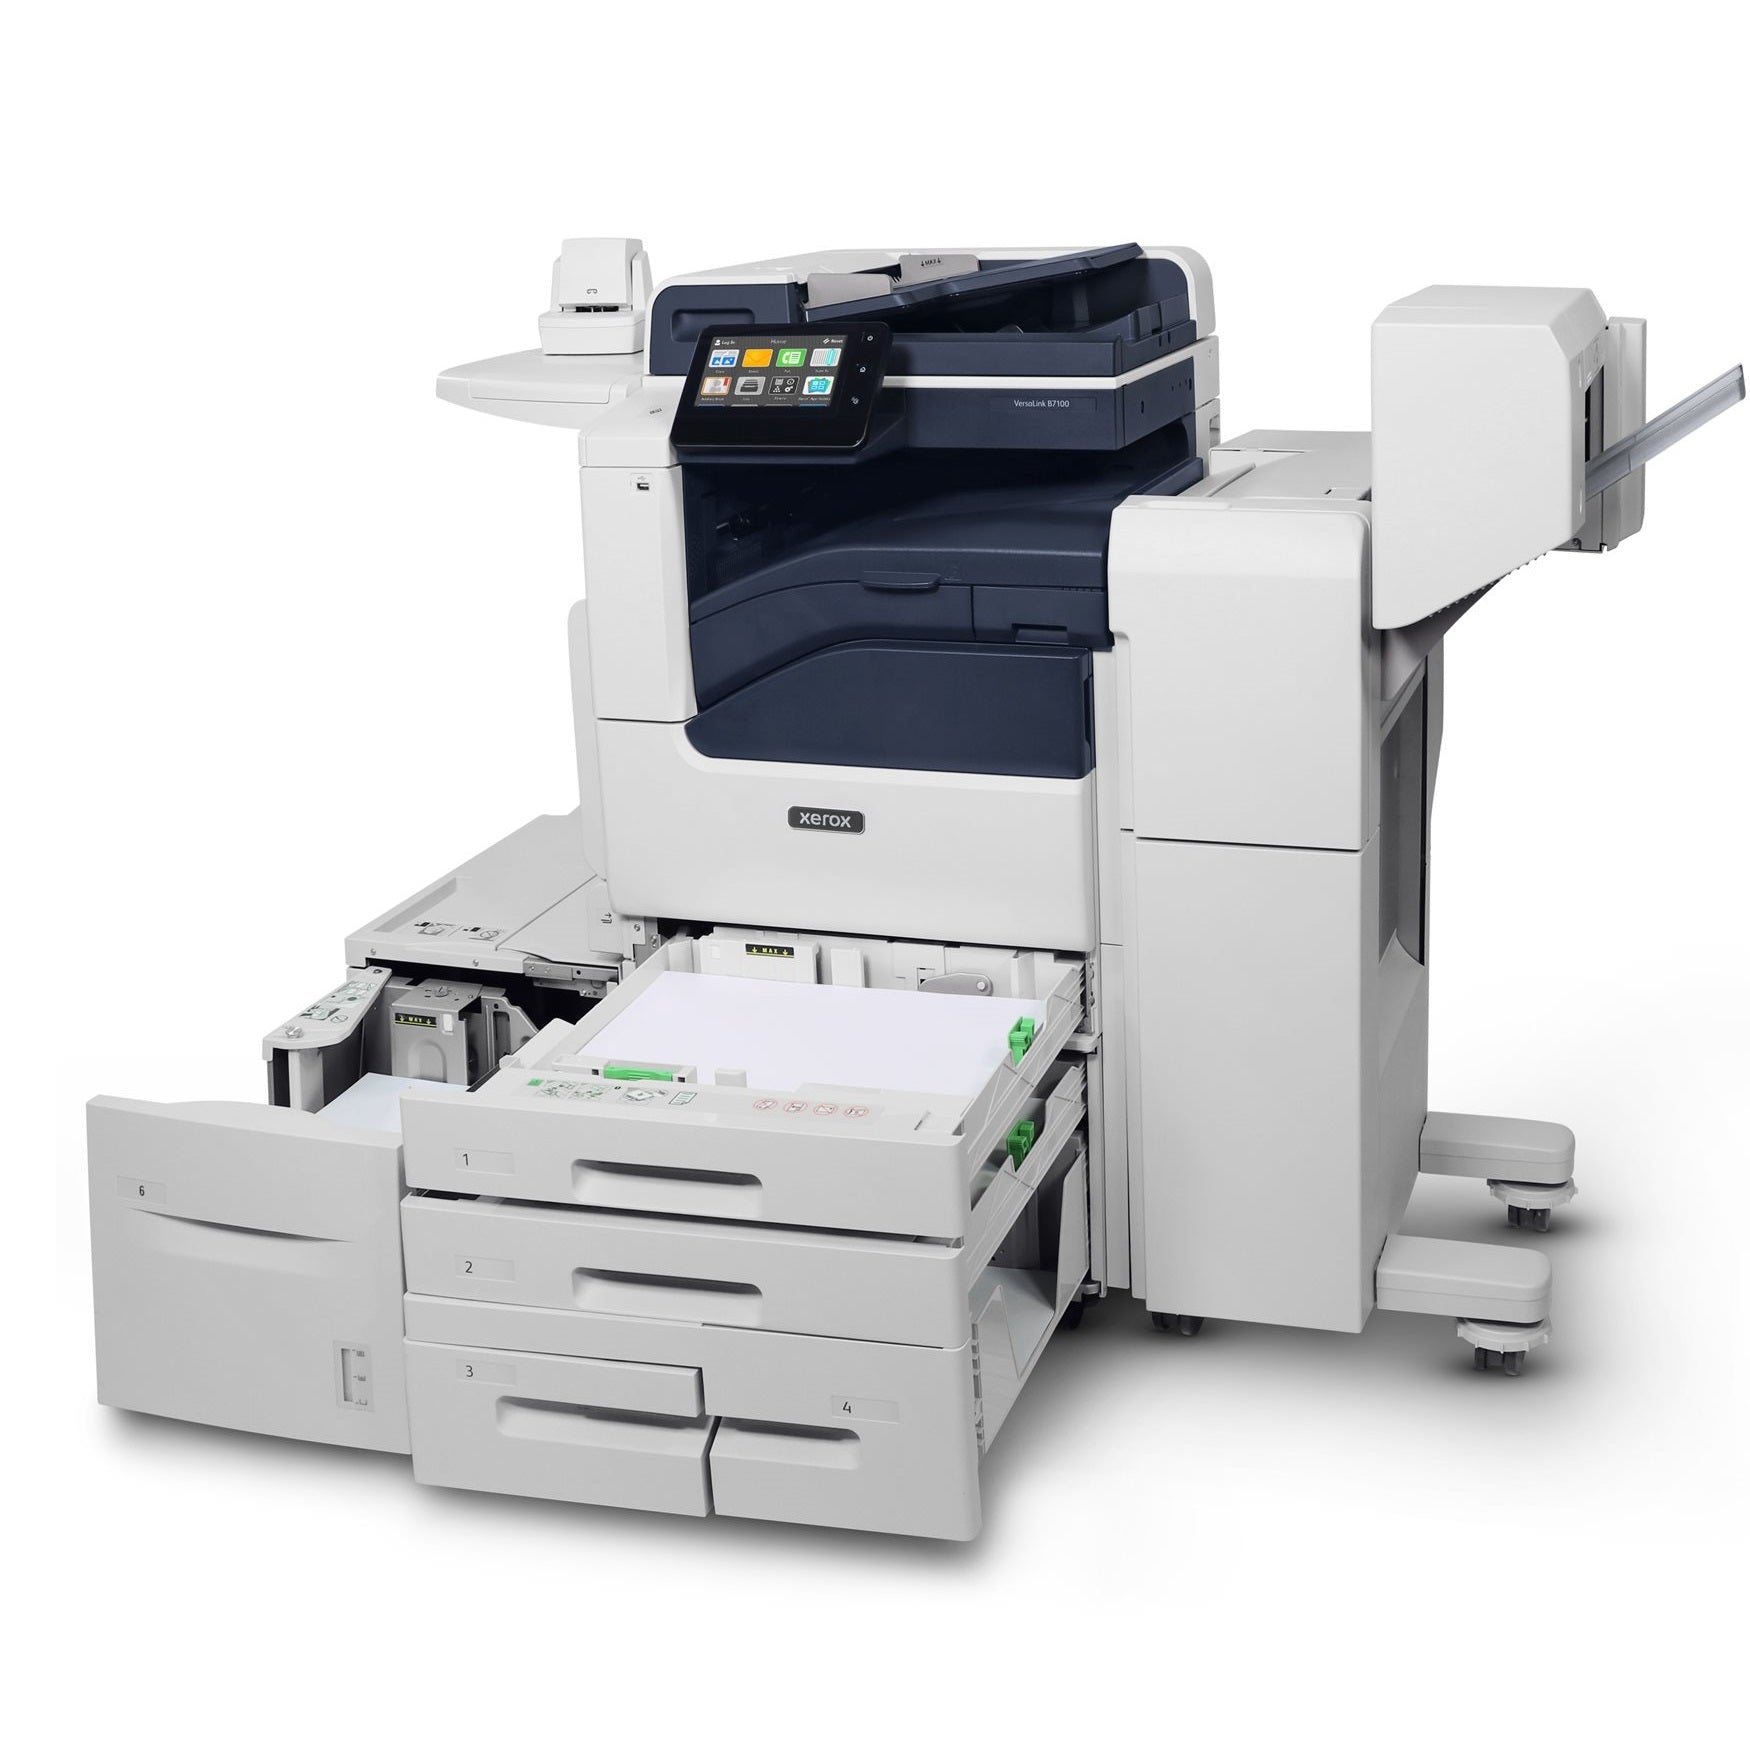 Absolute Toner Xerox VersaLink B7135 Monochrome Multifunction Laser Printer with 130 Sheet DADF, Duplex, Scan To Email, Security - Ideal For Small To Mid-Size Workgroups Printers/Copiers